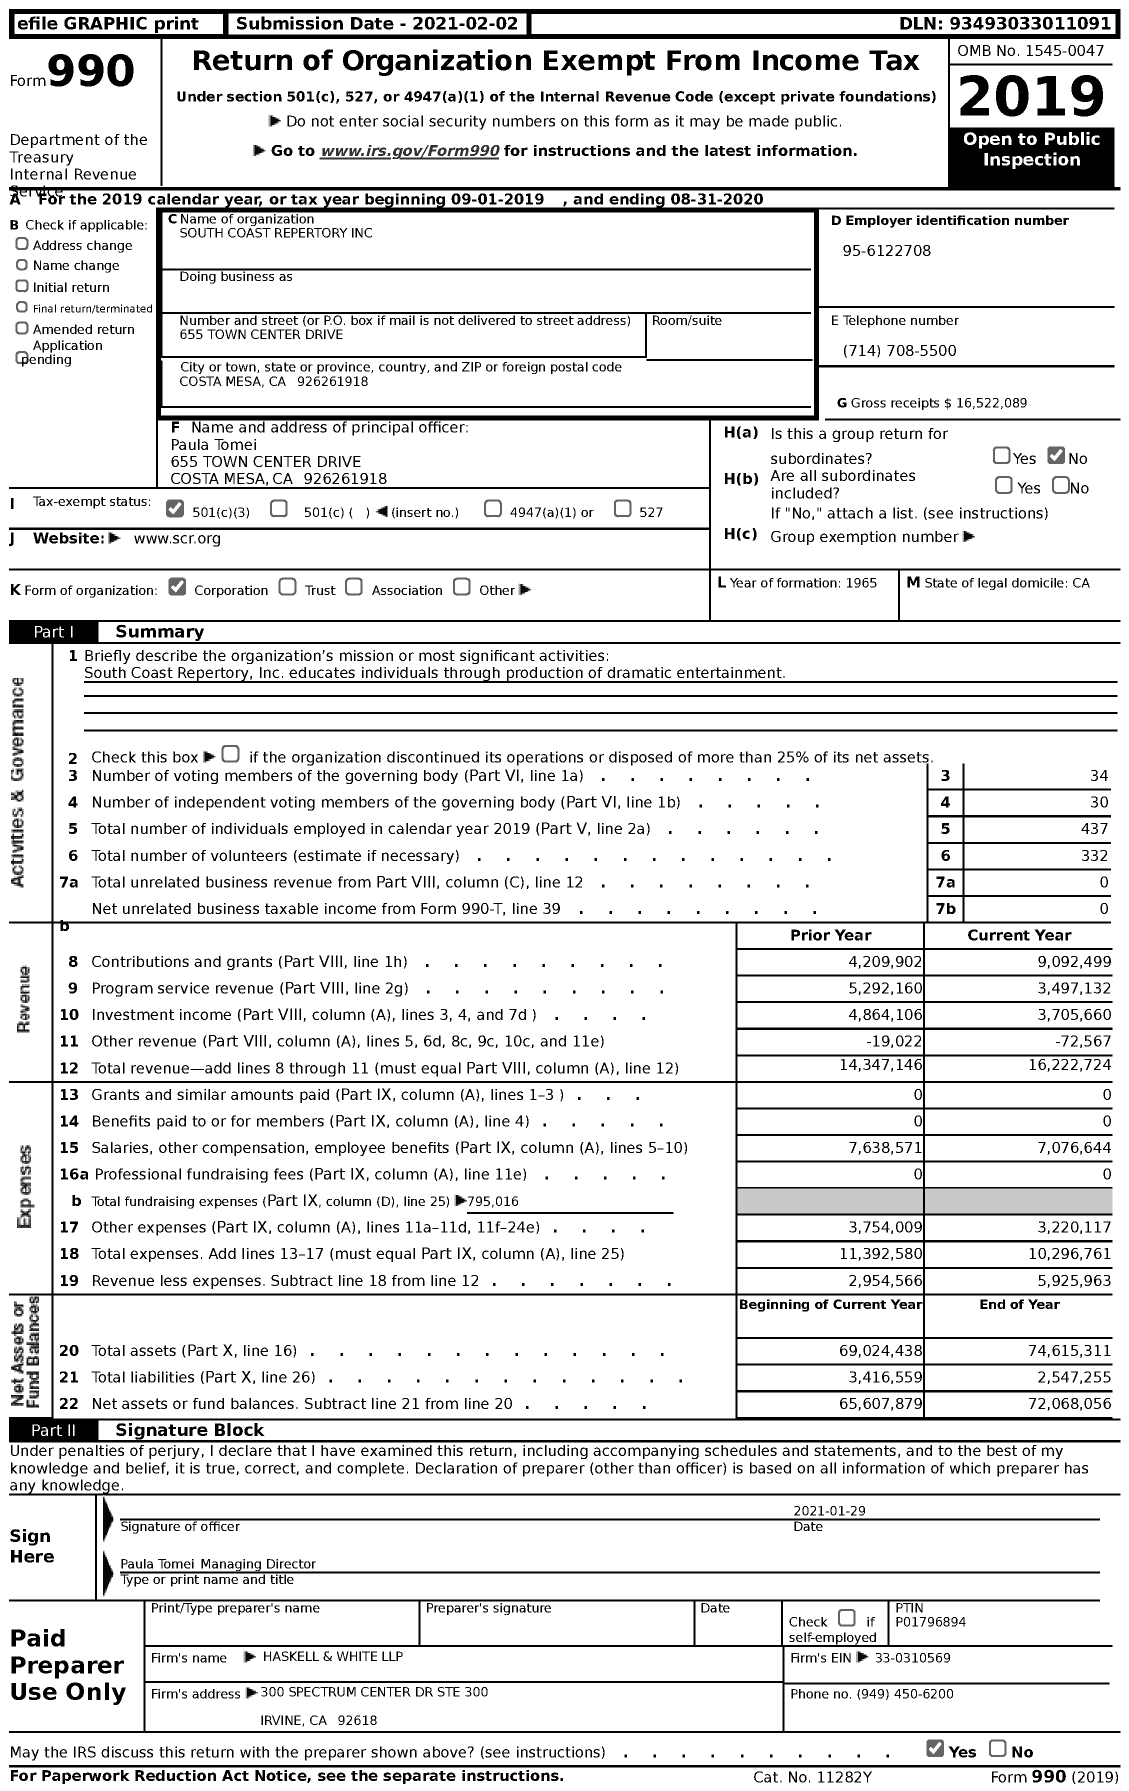 Image of first page of 2019 Form 990 for South Coast Repertory (SCR)